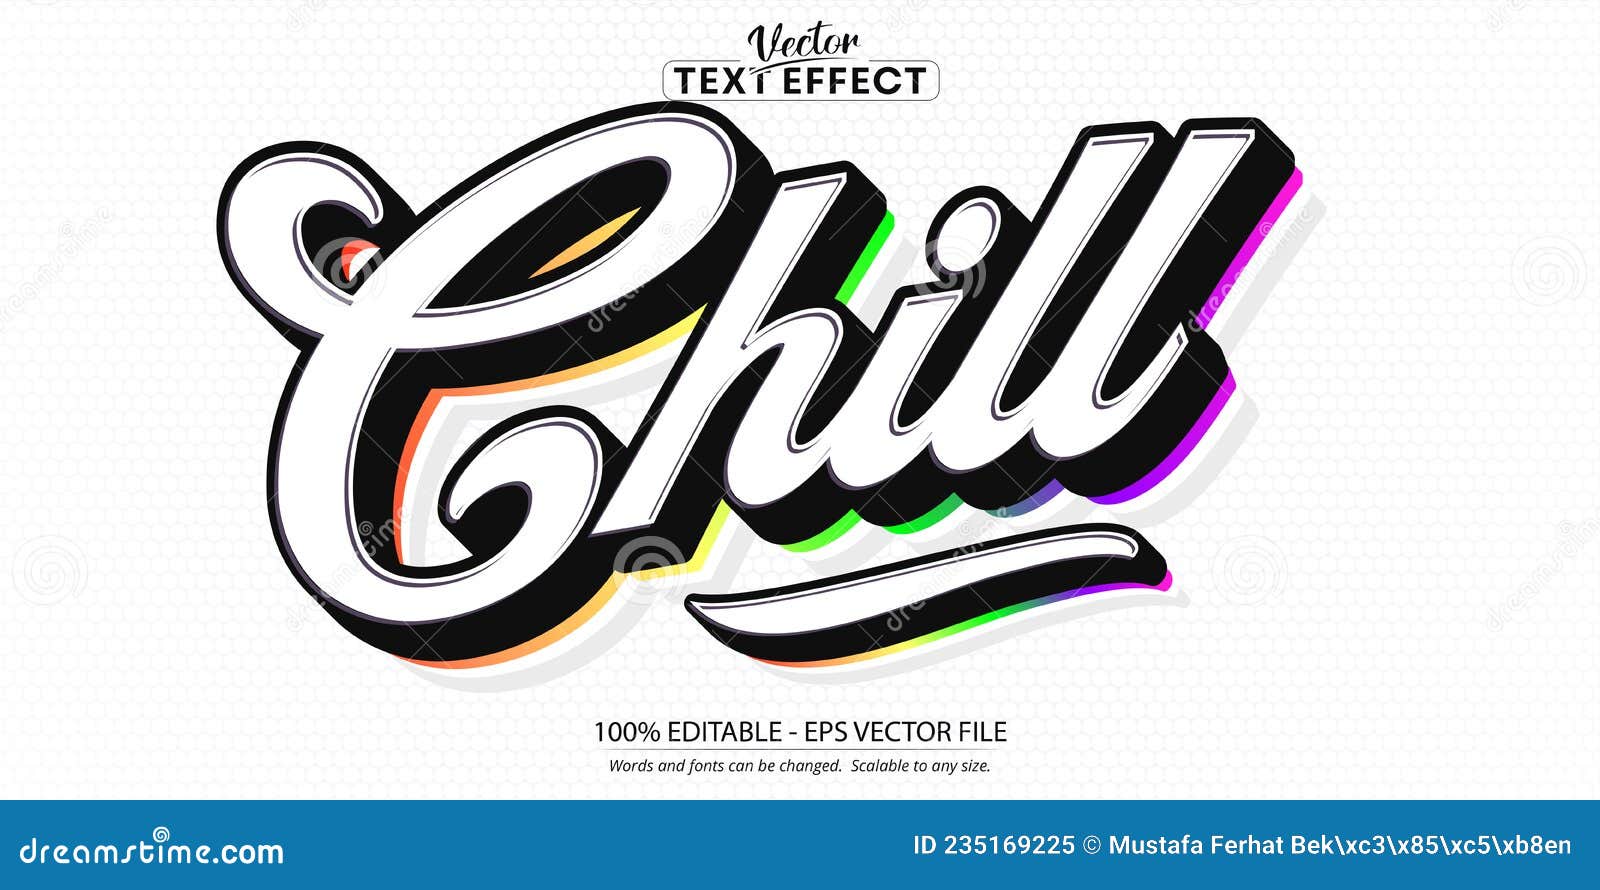 chill text style, minimalistic style editable text effect